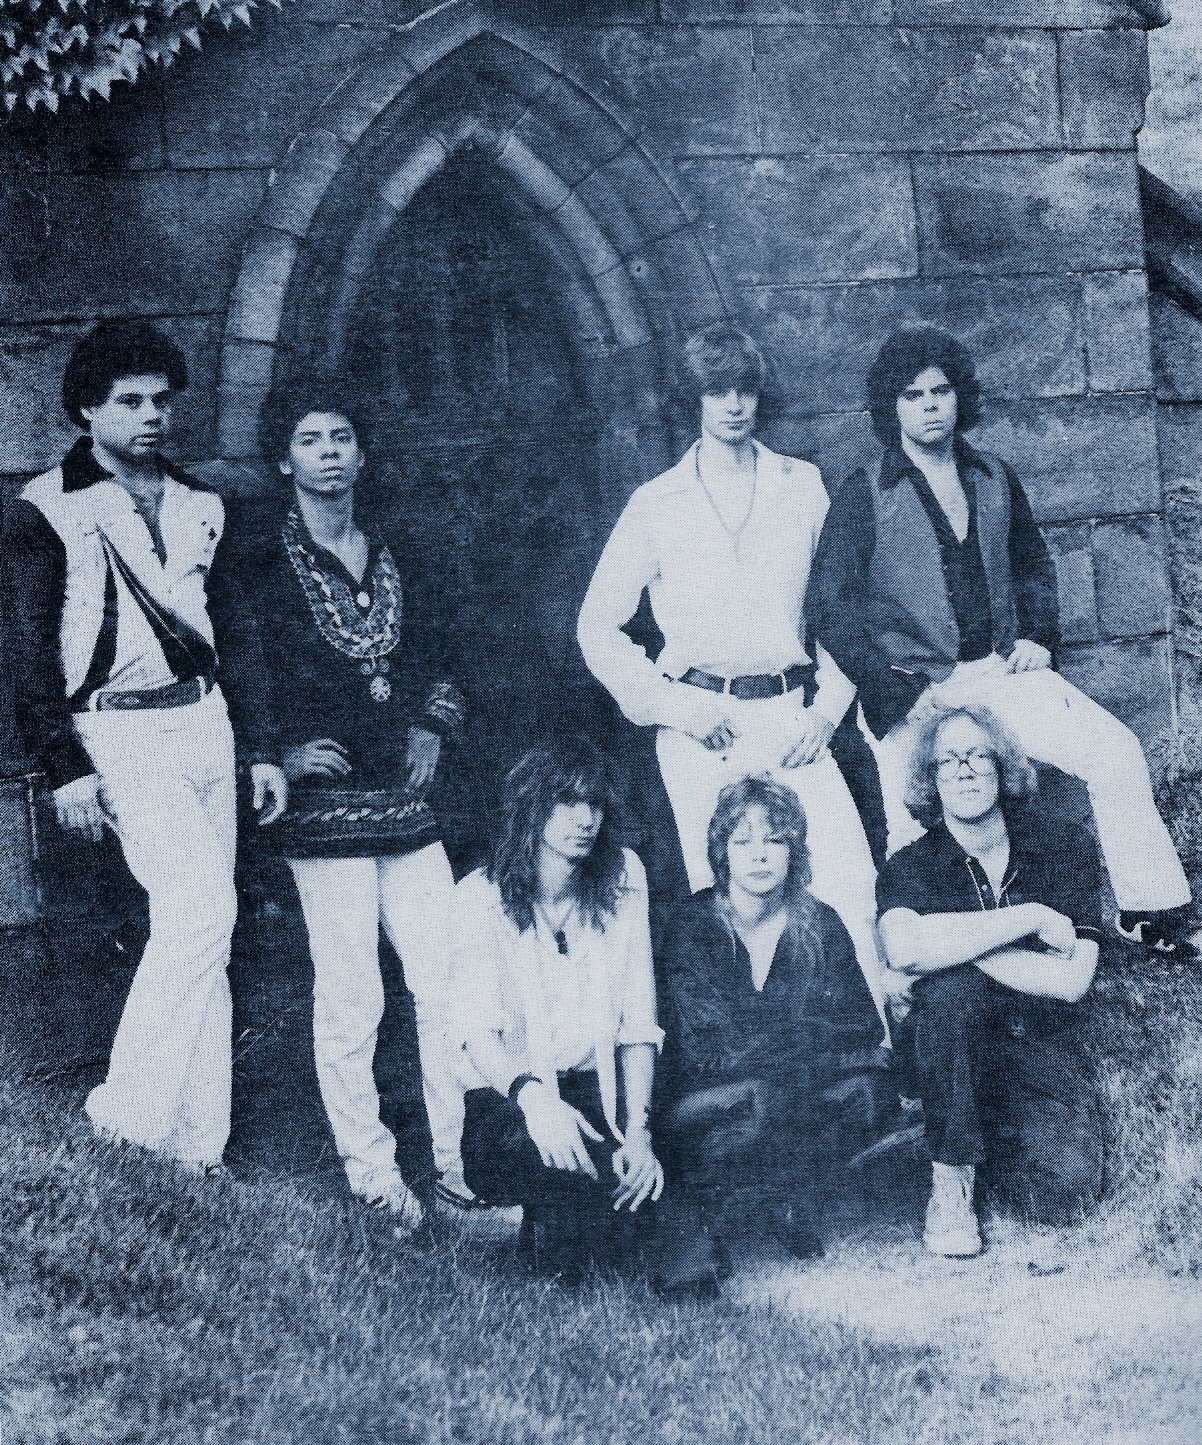 Parousia band photo - Forest Lawn Cemetary 1980